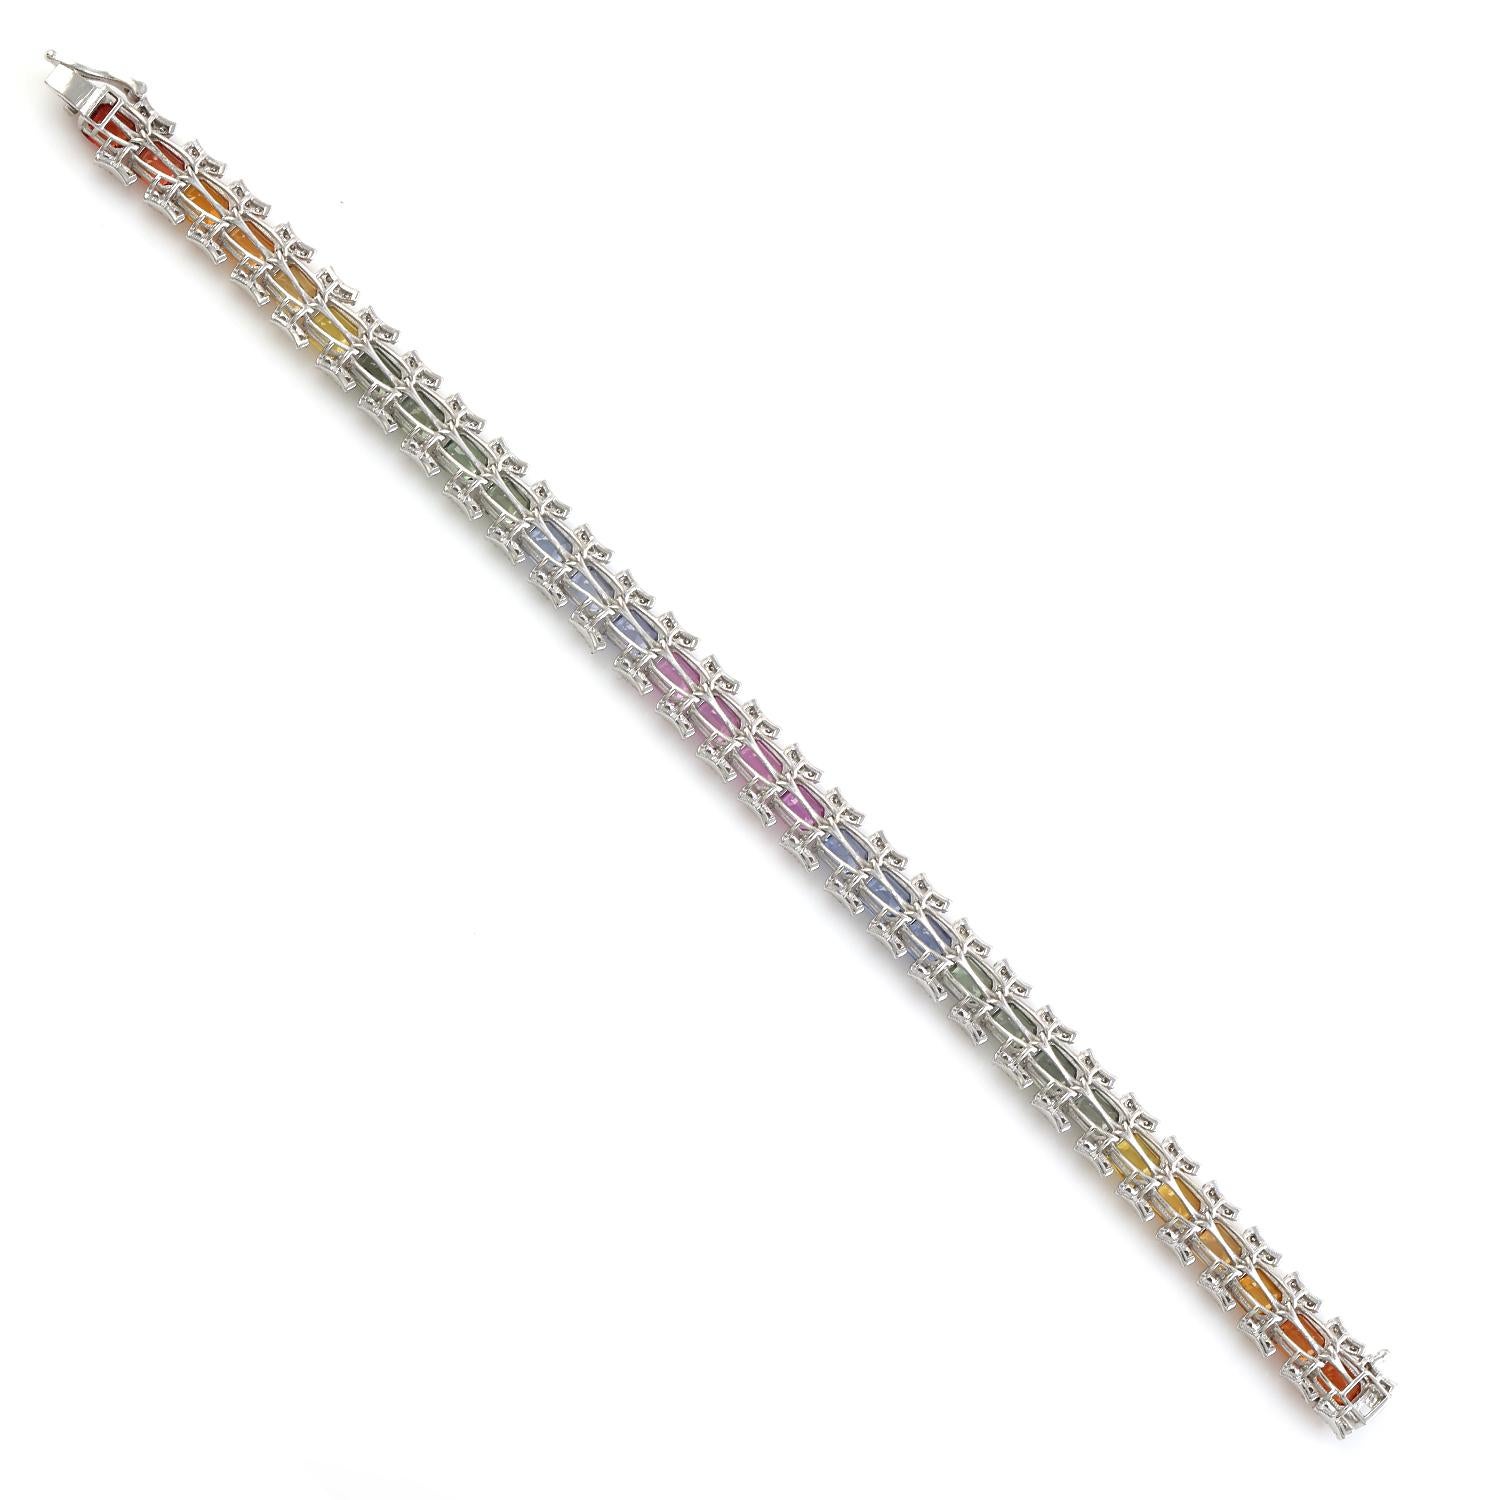 Mixed Cut 15.02 ct Rainbow Sapphire Bracelet With Diamonds Made In 18k White Gold For Sale